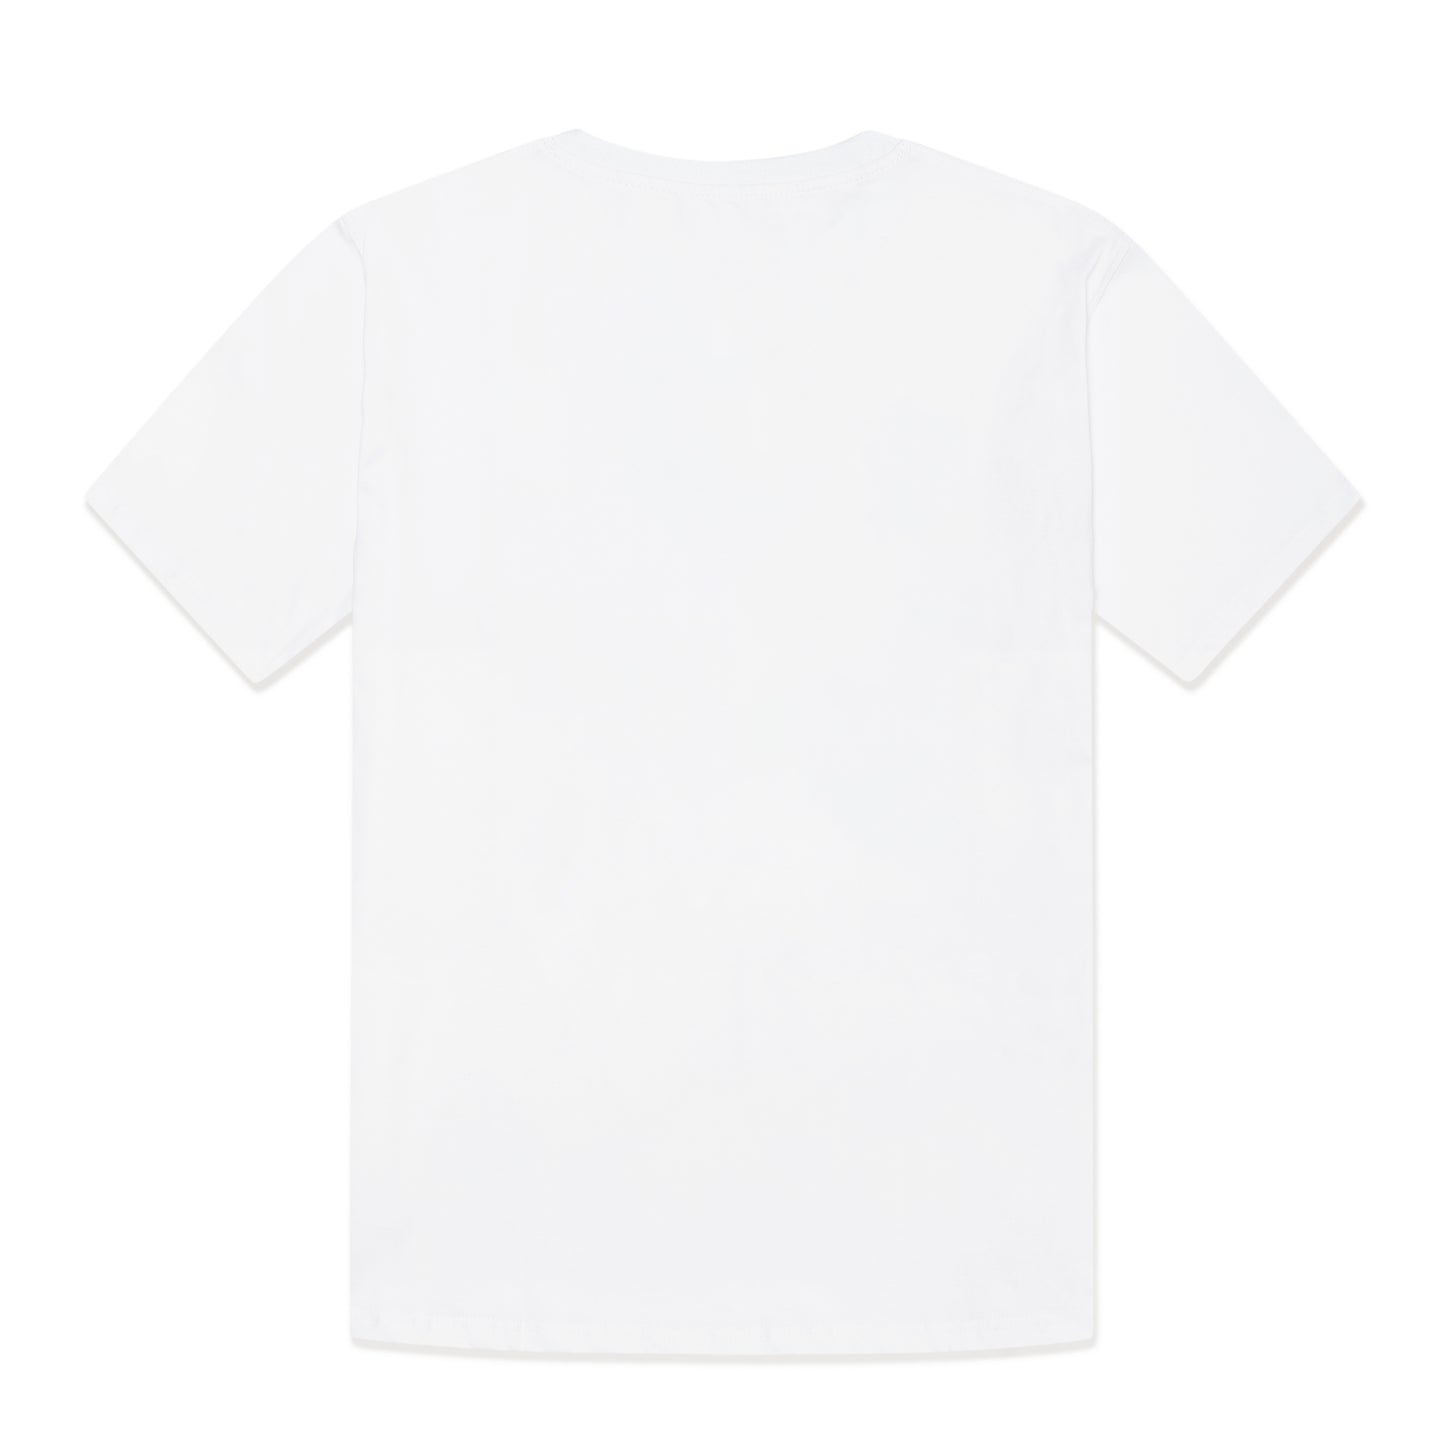 The-World-Is-Yours-Tee-in-white